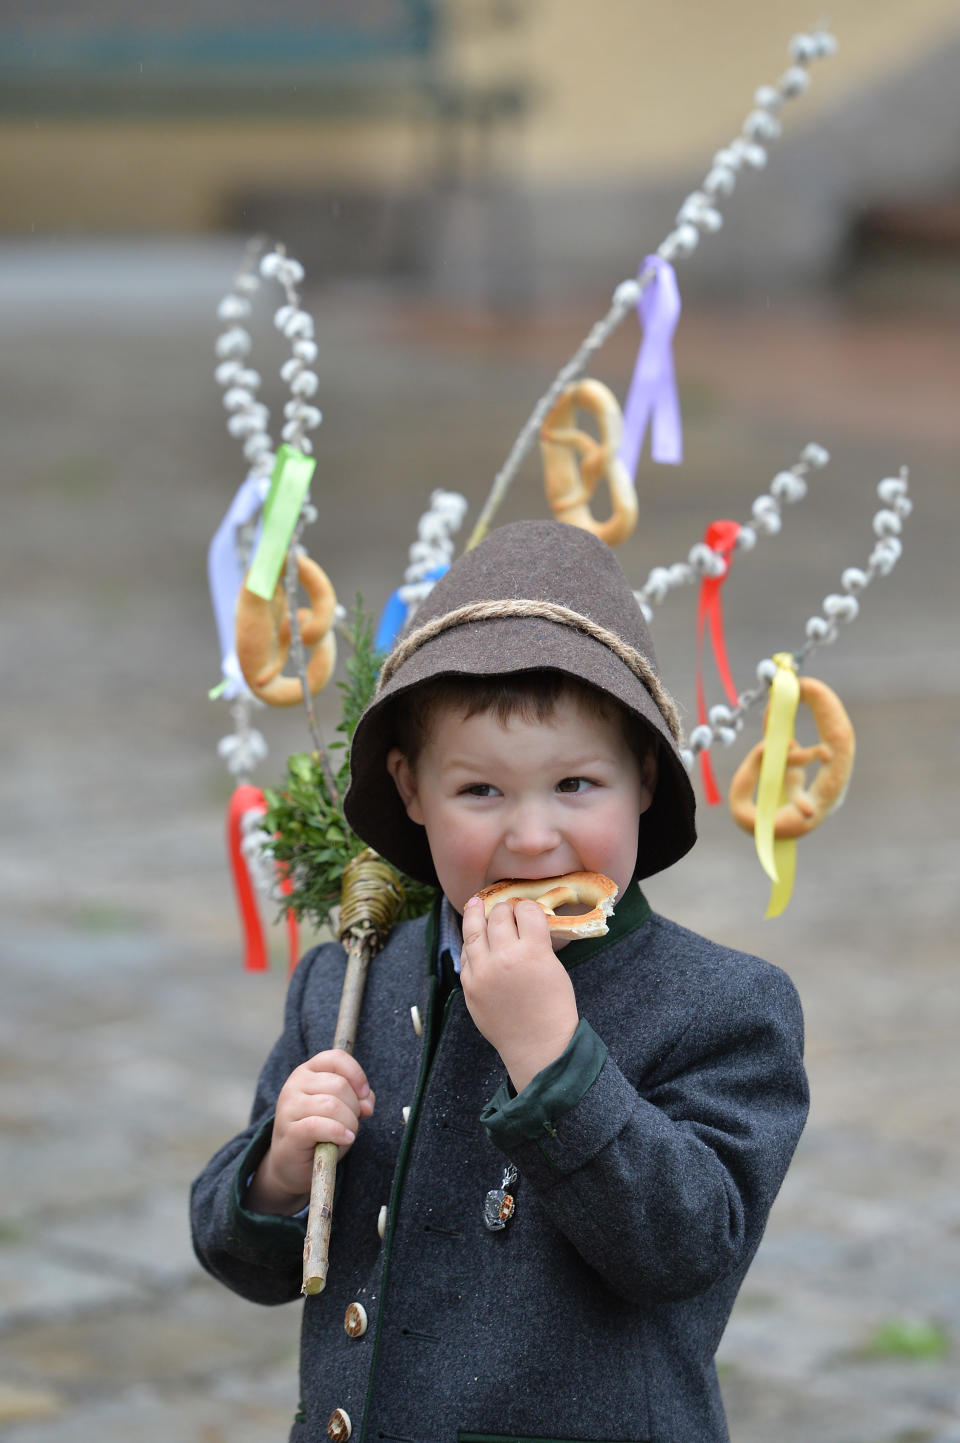 The three years old Thomas Haitzmann eats a "Palmbrezeln" after a Palm Sunday procession in Lofer, Austrian province of Salzburg, Sunday, April 13, 2014. Palm Sunday opens the Holy Week which ends with Easter Sunday, the most important Christian holiday. (AP Photo/Kerstin Joensson)